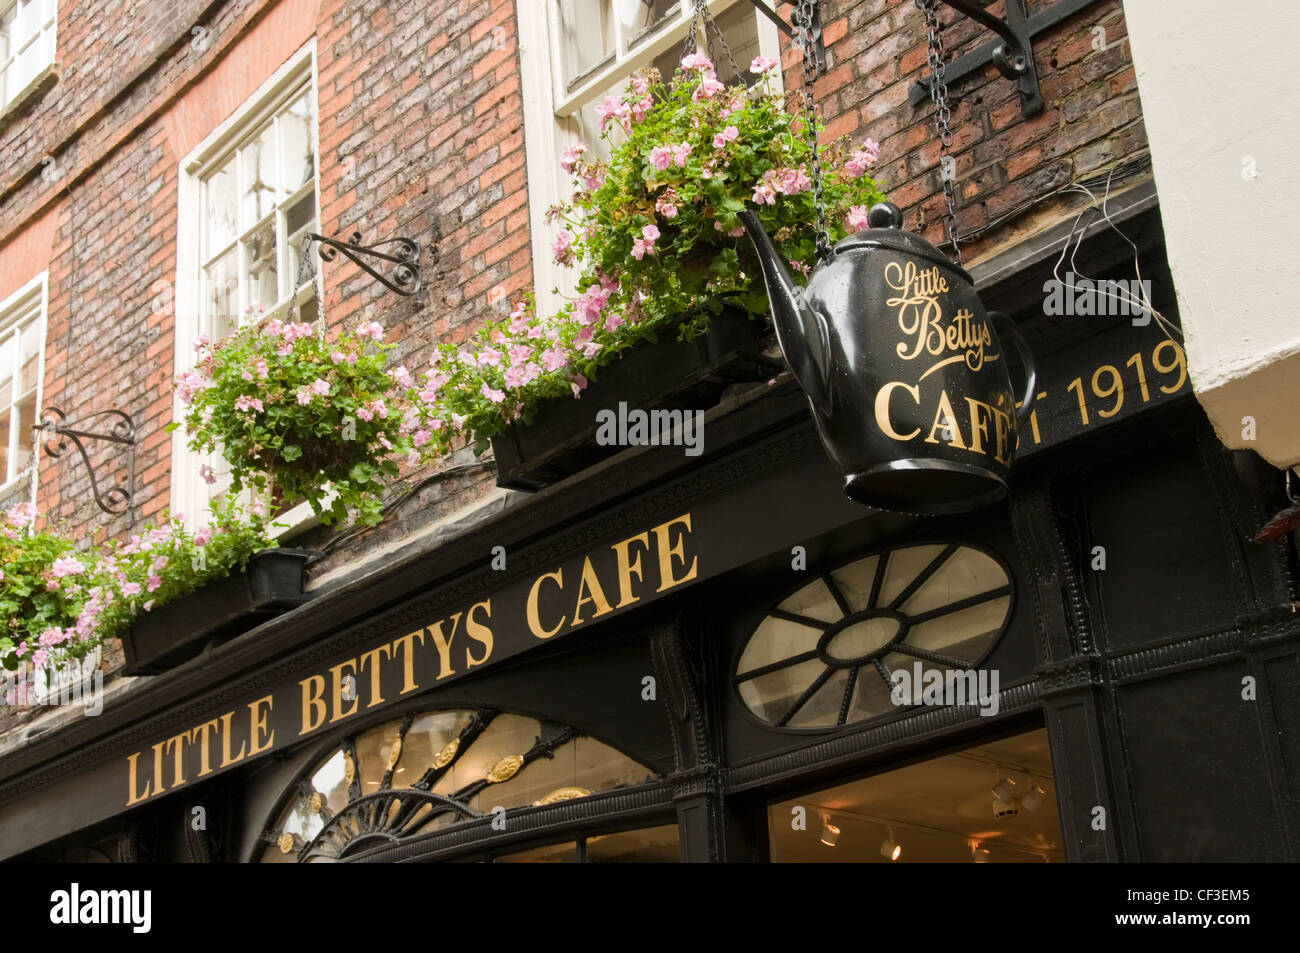 Windowsill flowers sit above the famous Bettys cafe shop front in York. Stock Photo